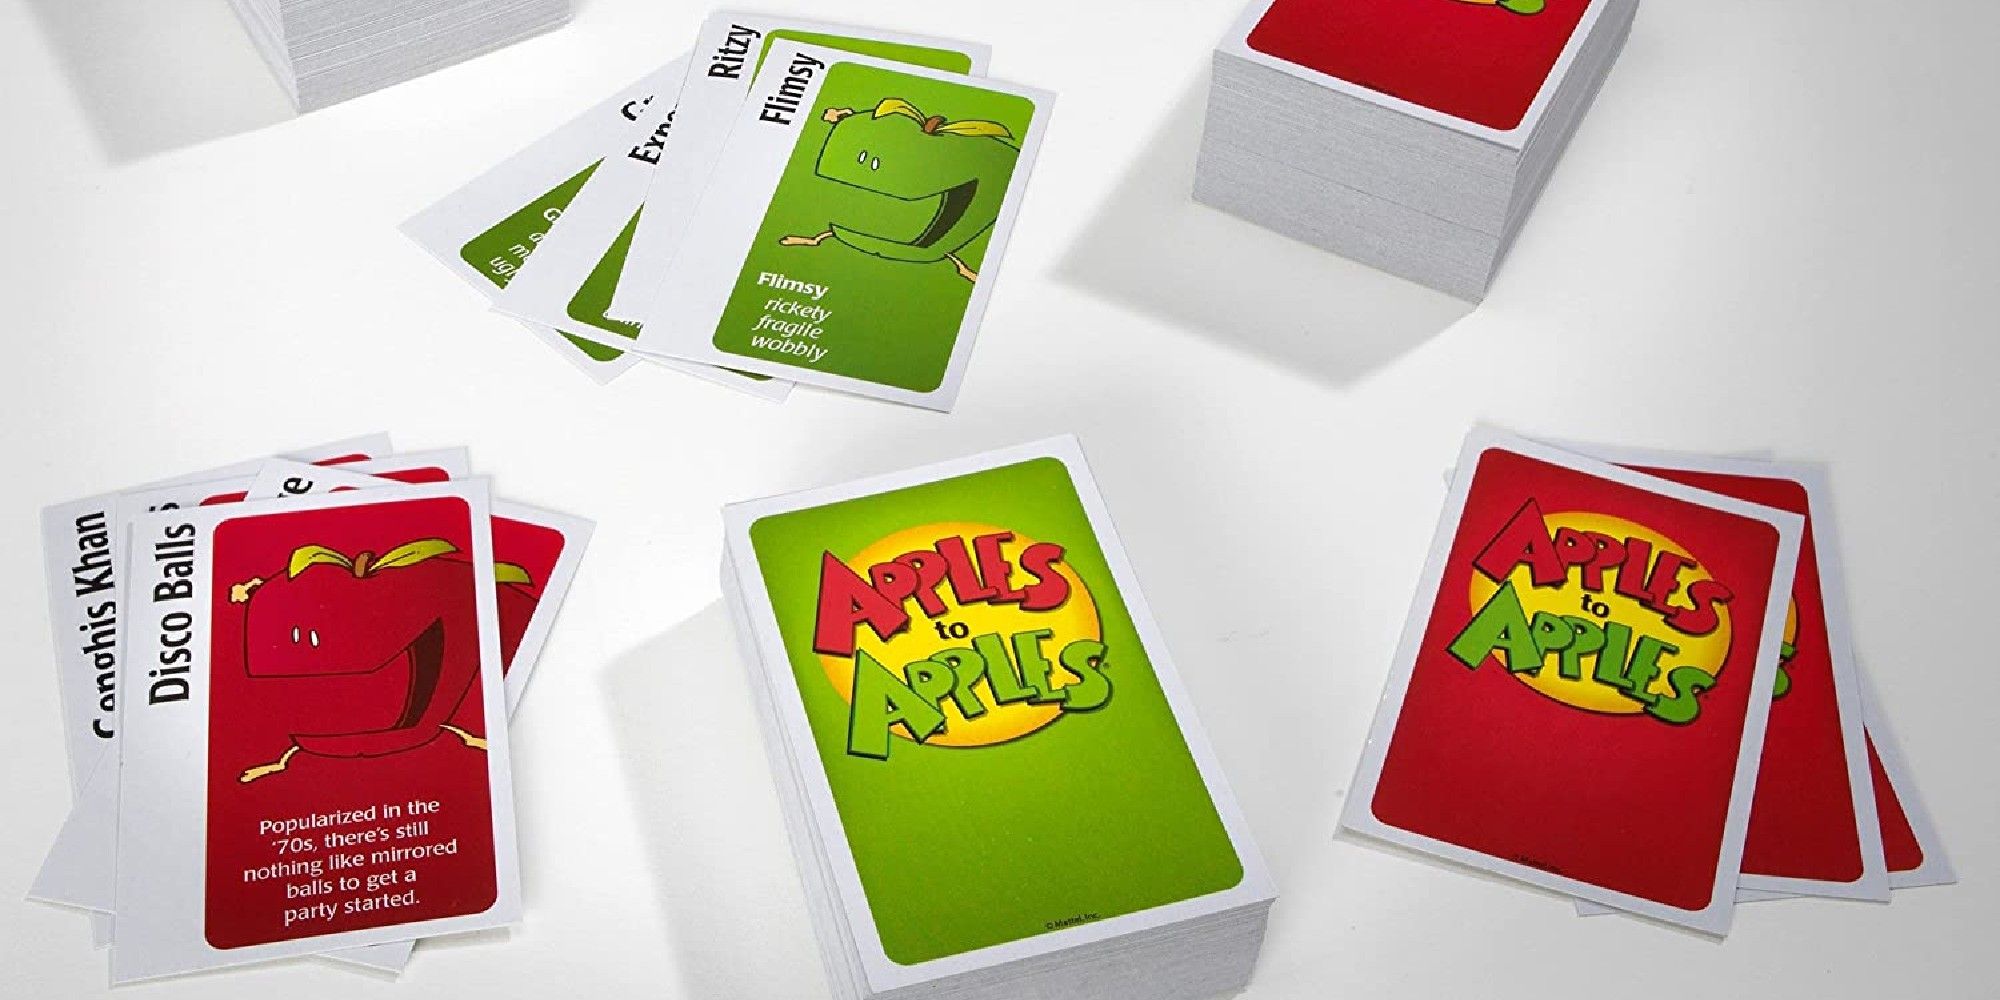 The Two Types Of Cards In Apples To Apples